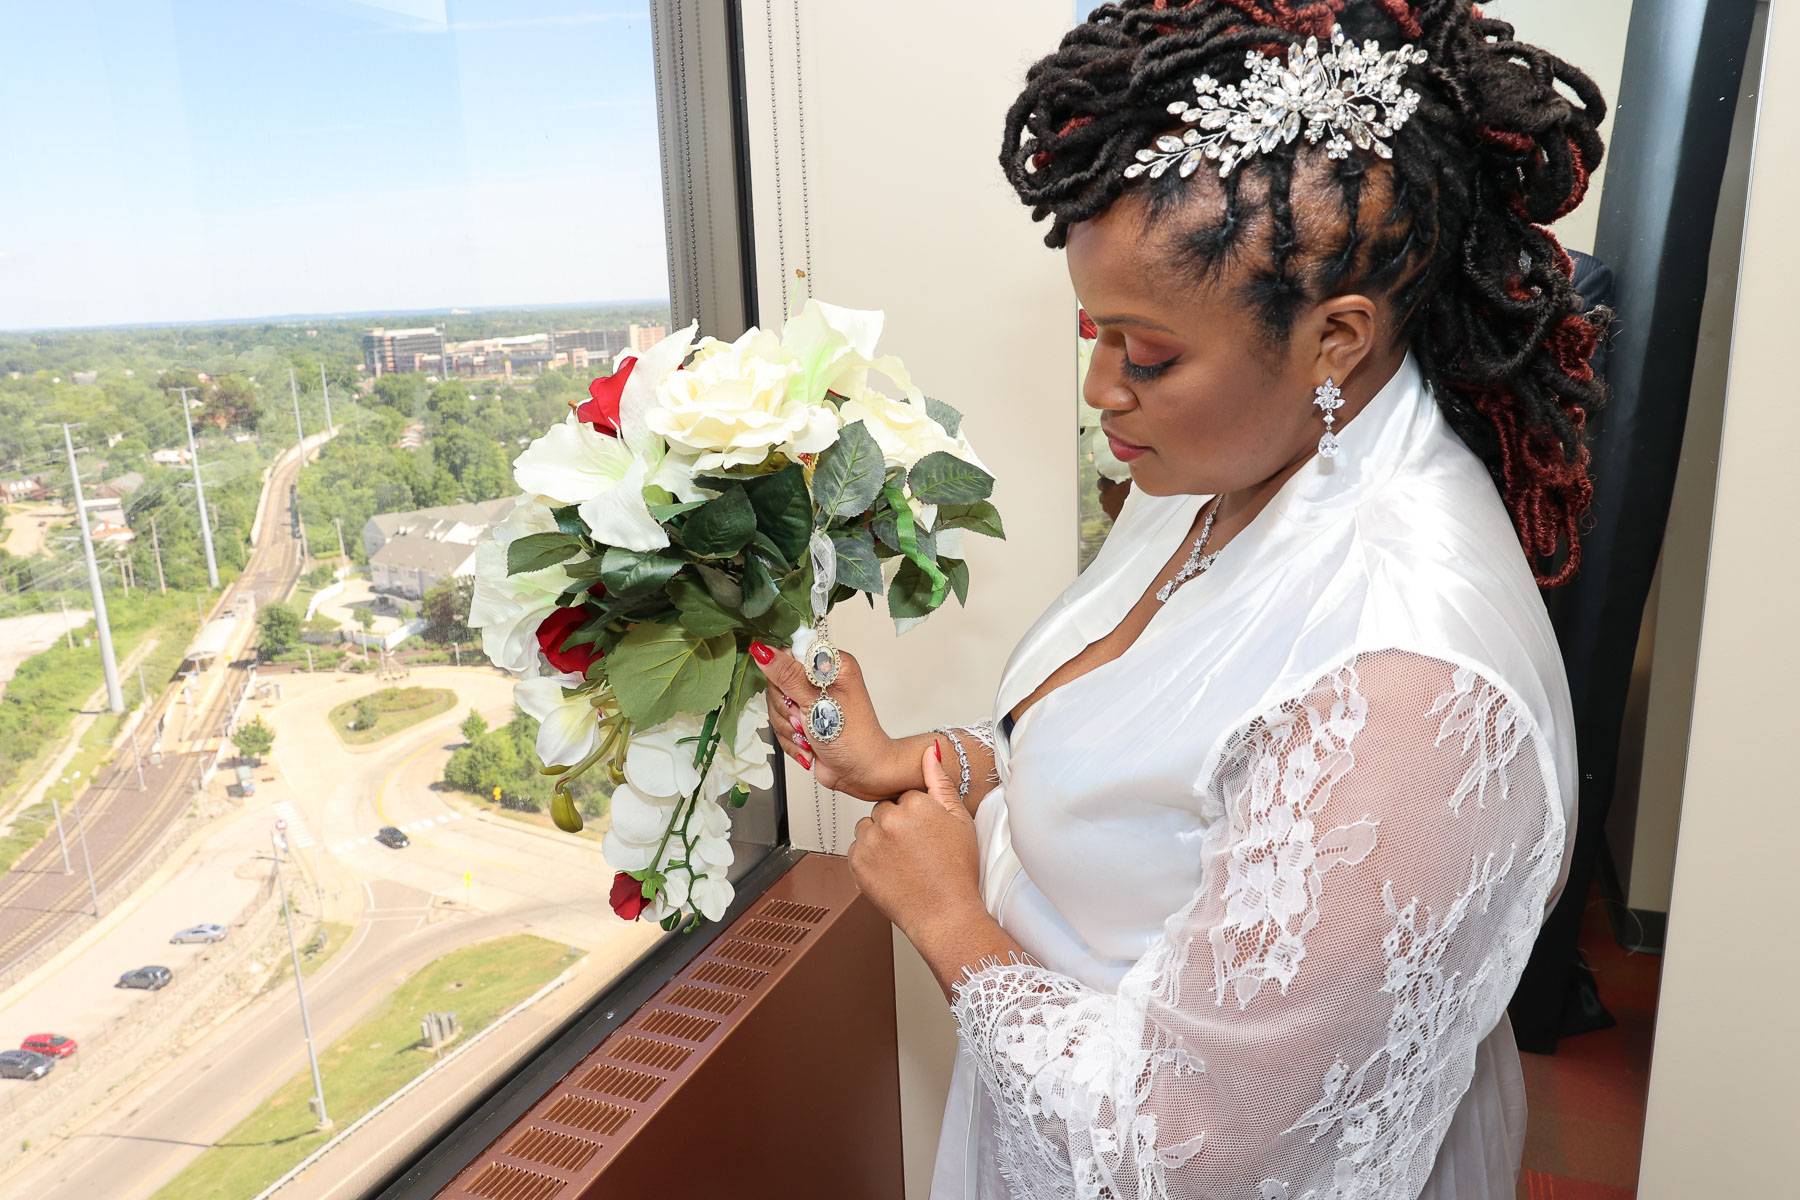 The bride holding the bouquet and locket